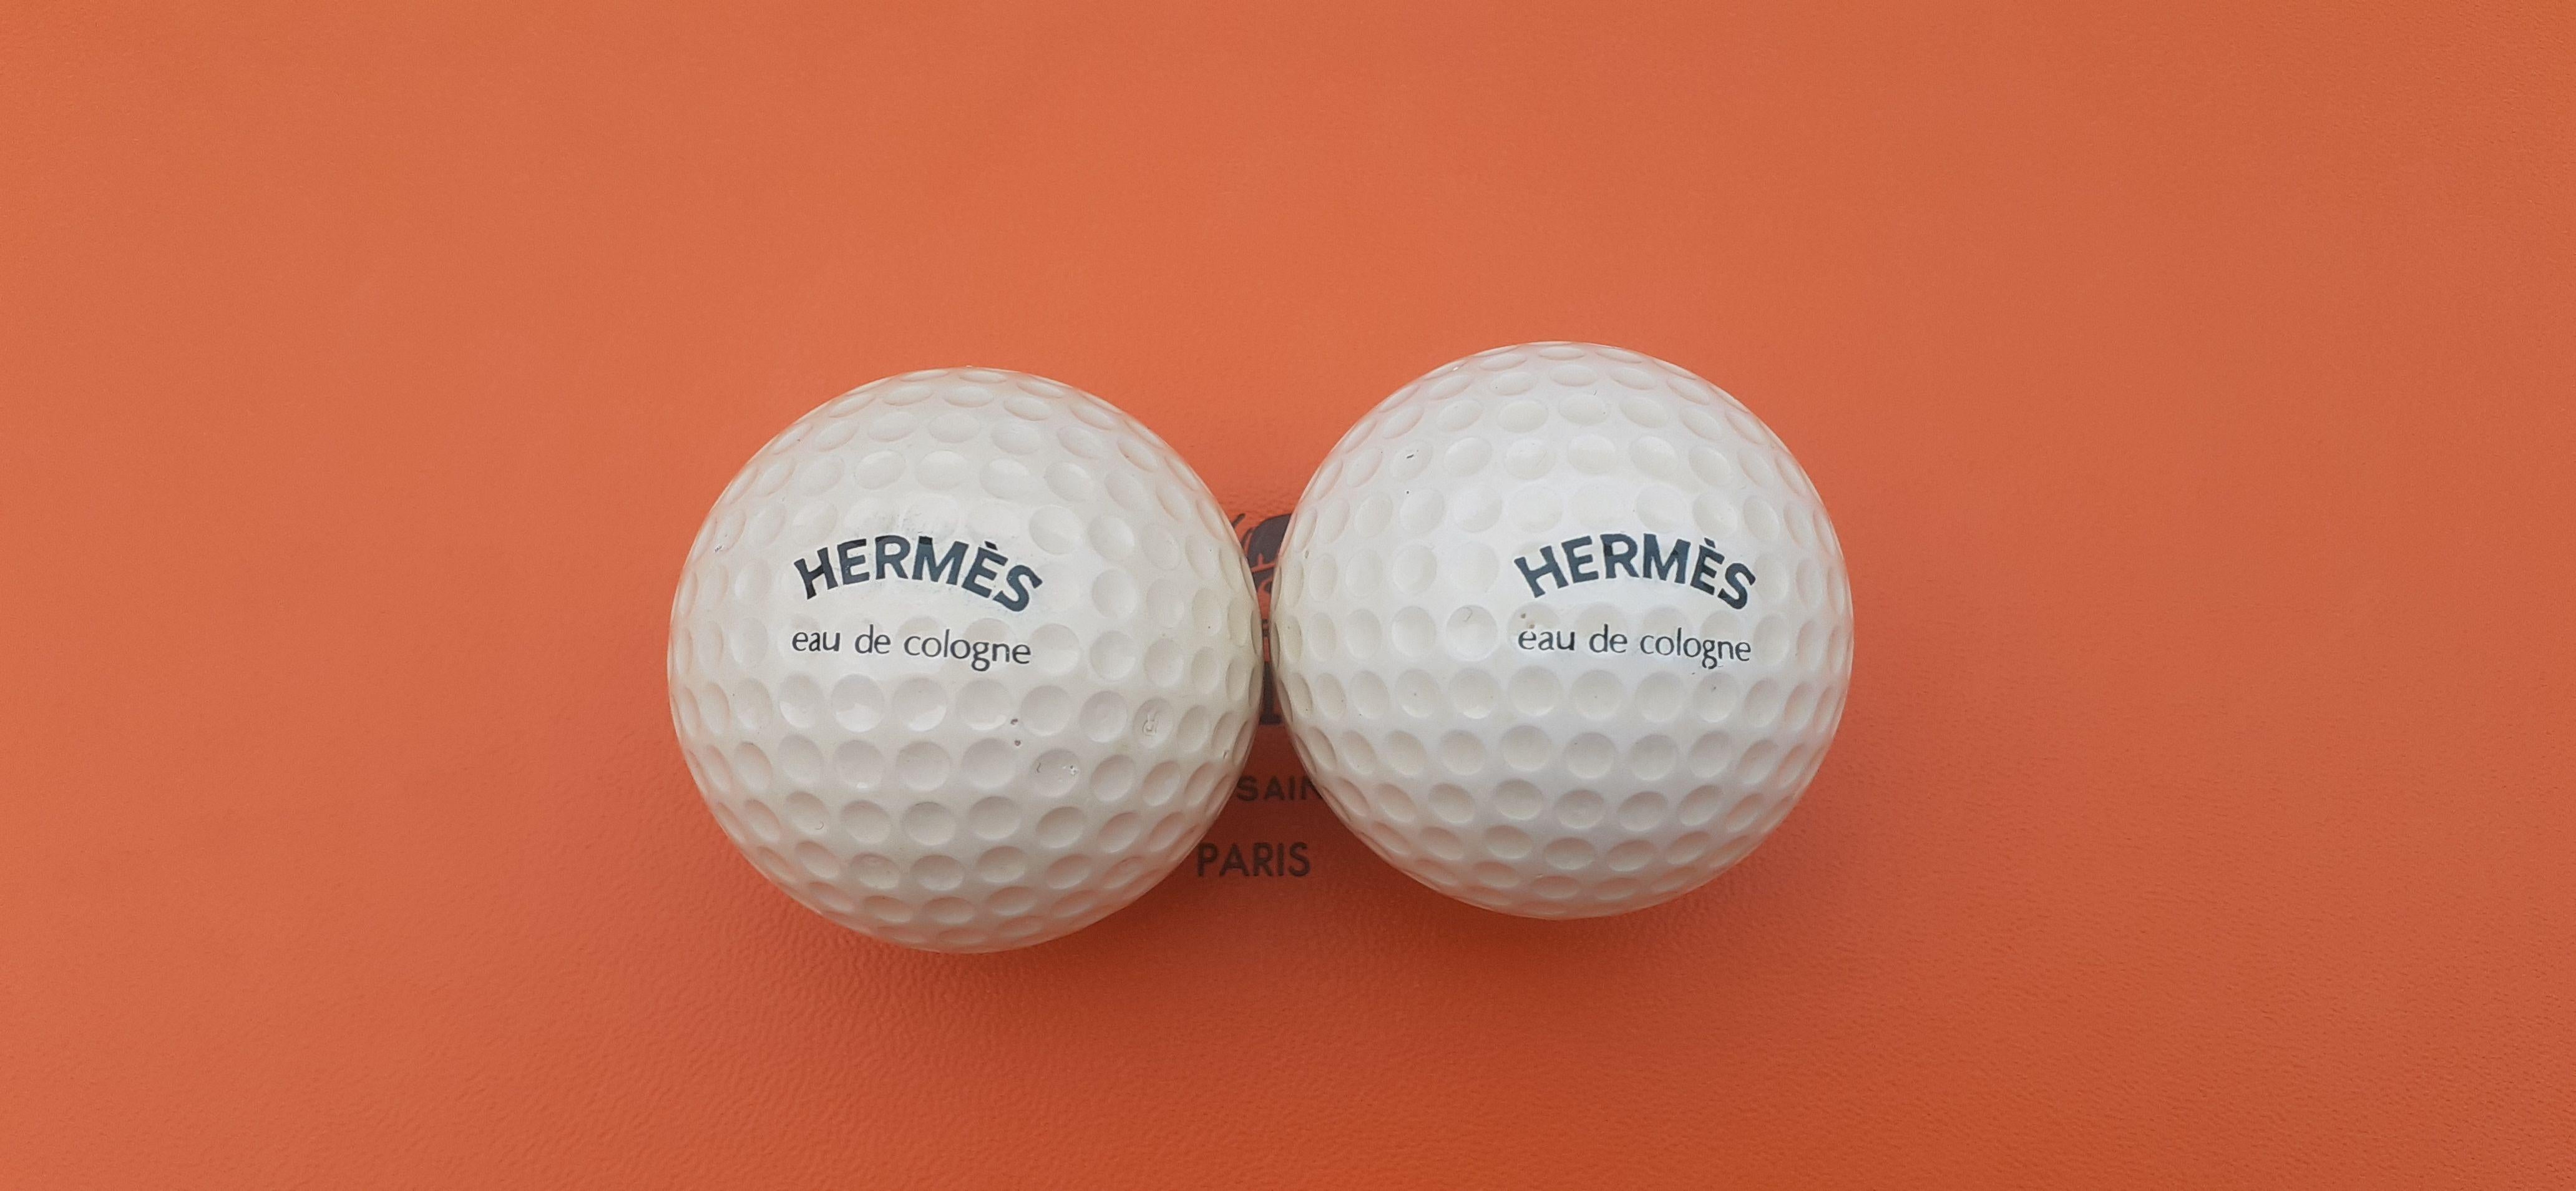 Super Rare Authentic Hermès Golf Balls

Real golf balls meeting the standards

Hermès has produced several sports items under the image of its “eau de cologne” collection, including backpacks and fanny packs.

